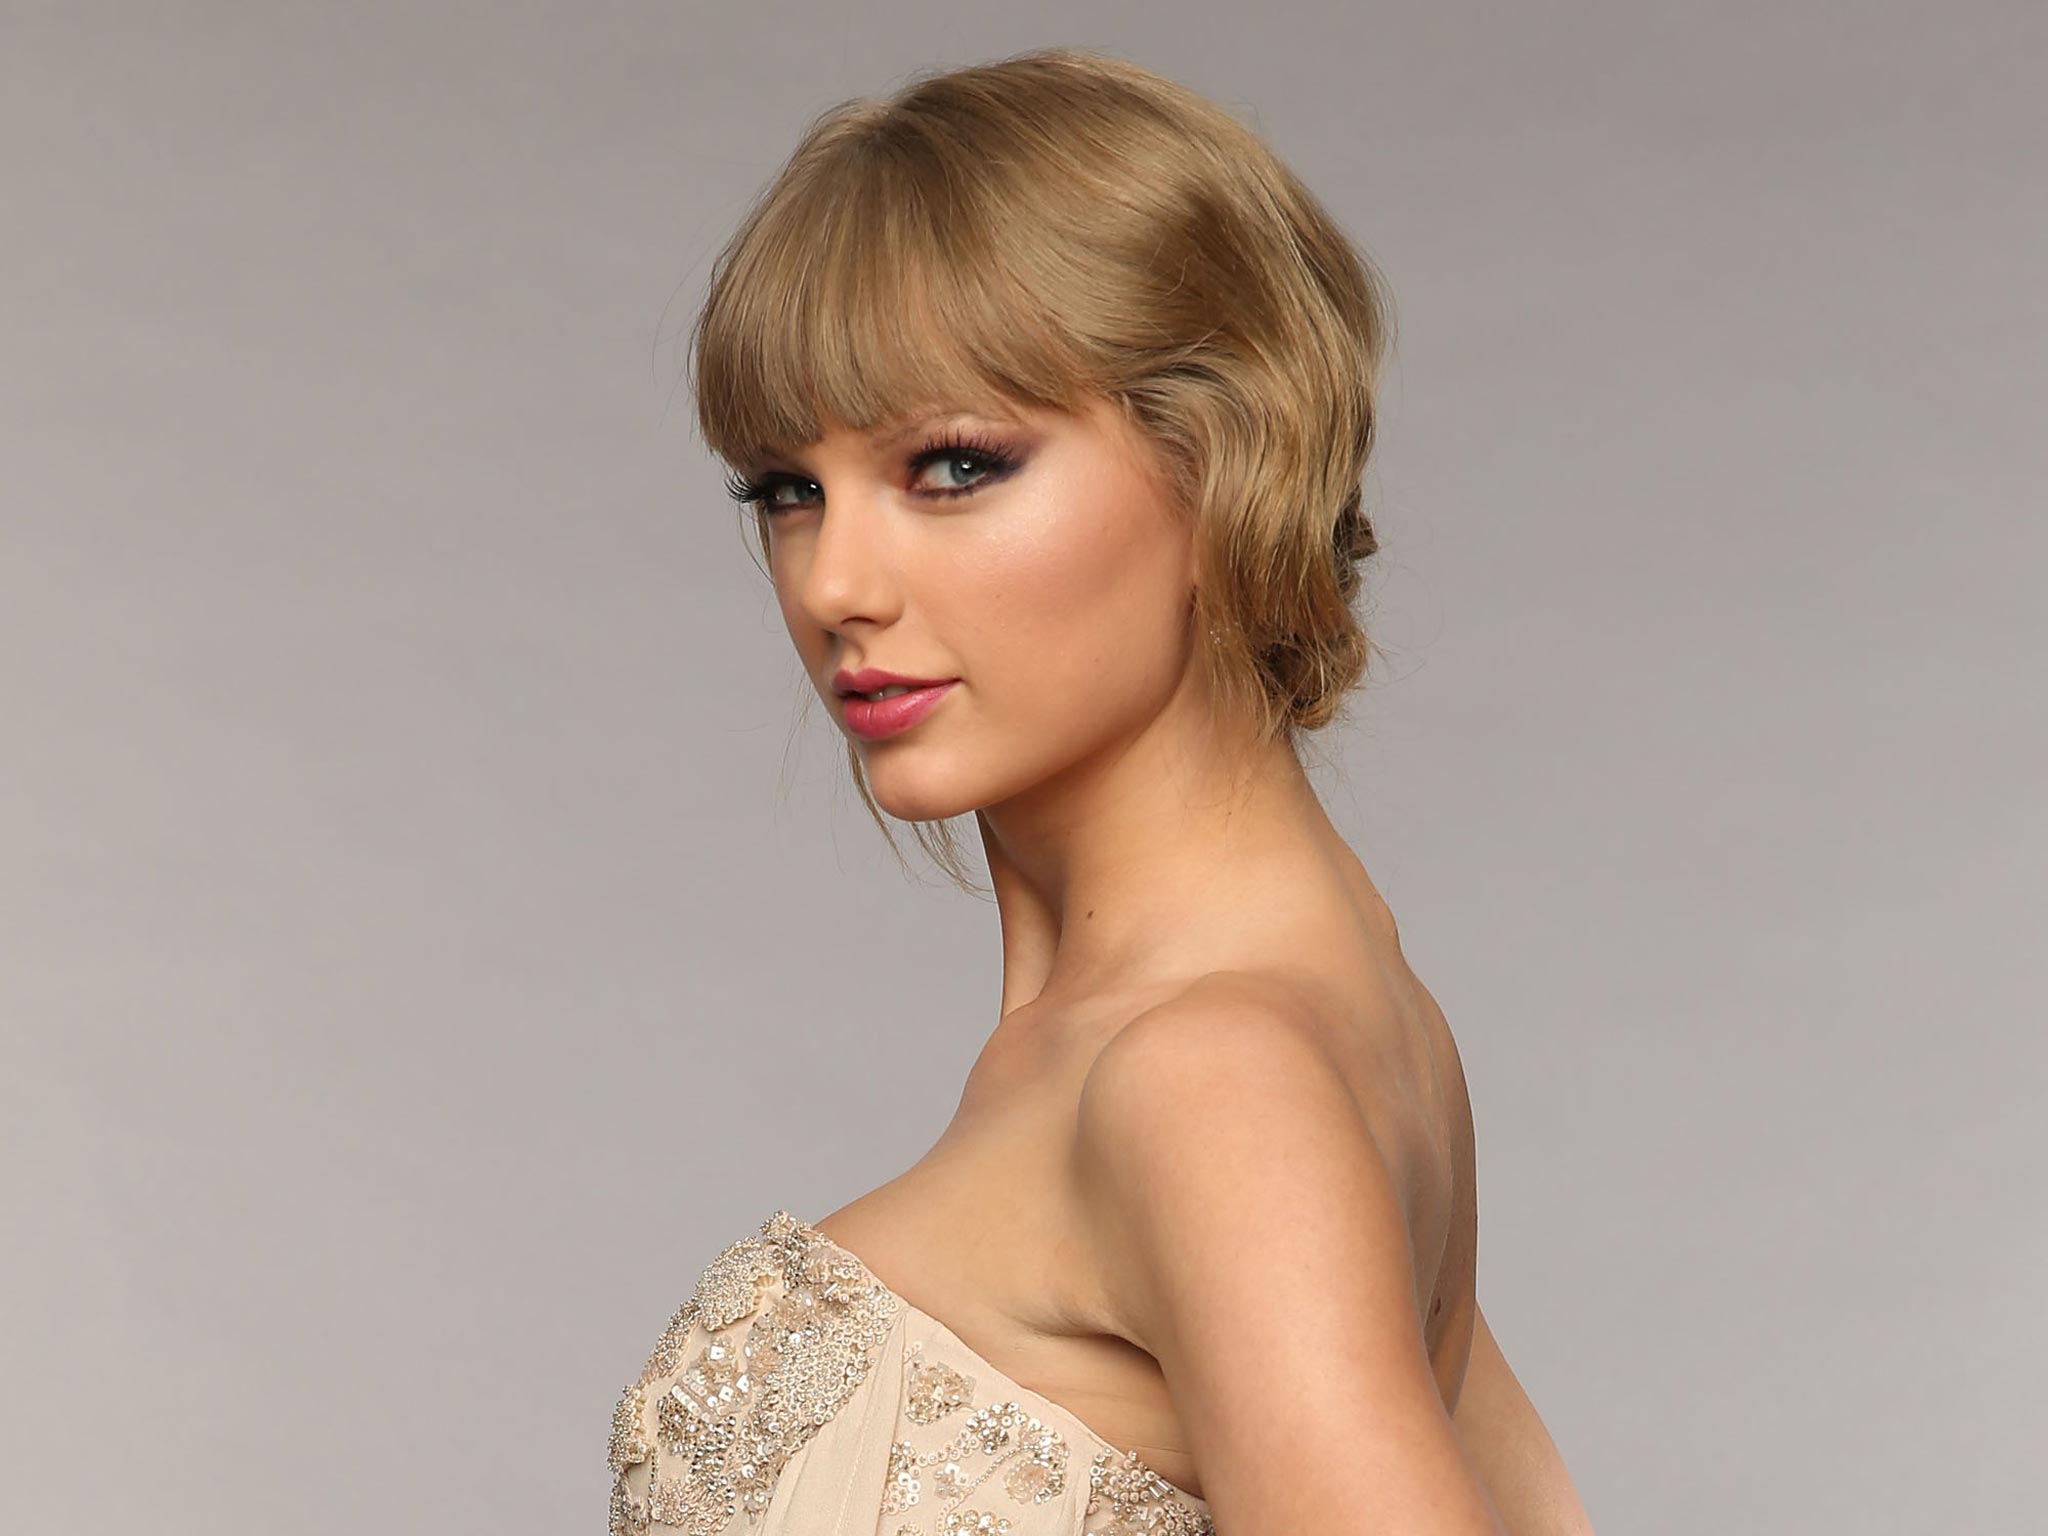 Country singer and pop star Taylor Swift has been named the most charitable celebrity of 2013